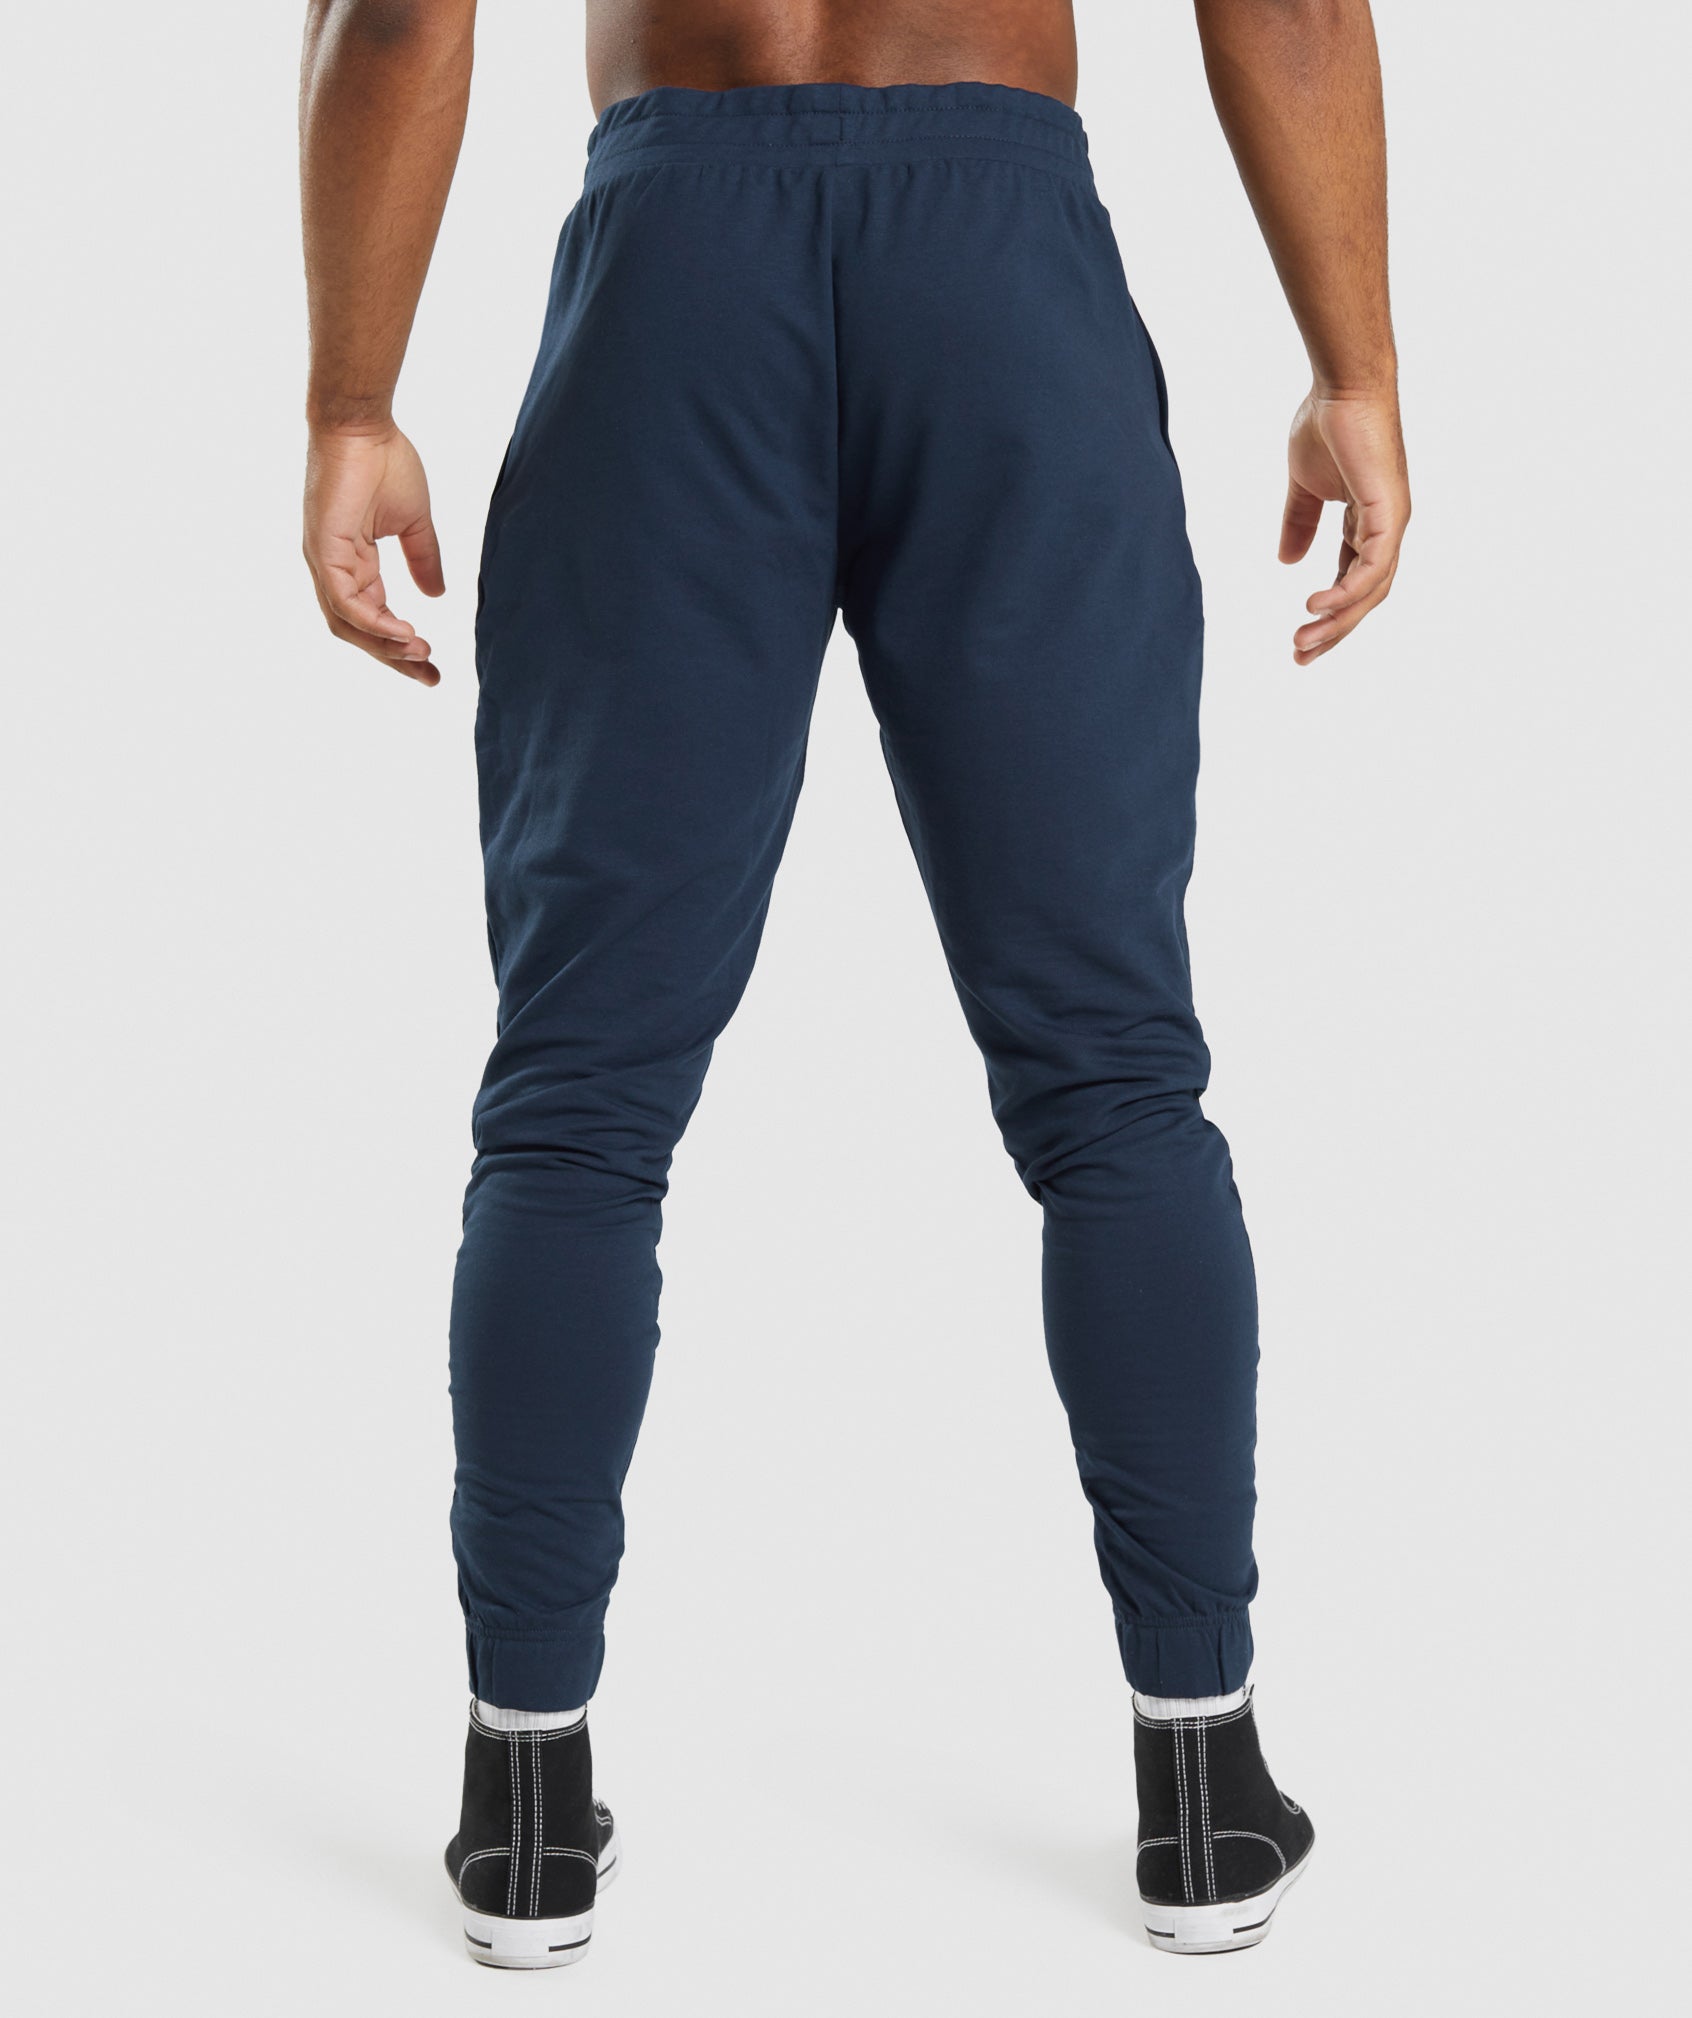 Critical Pant in Navy - view 2